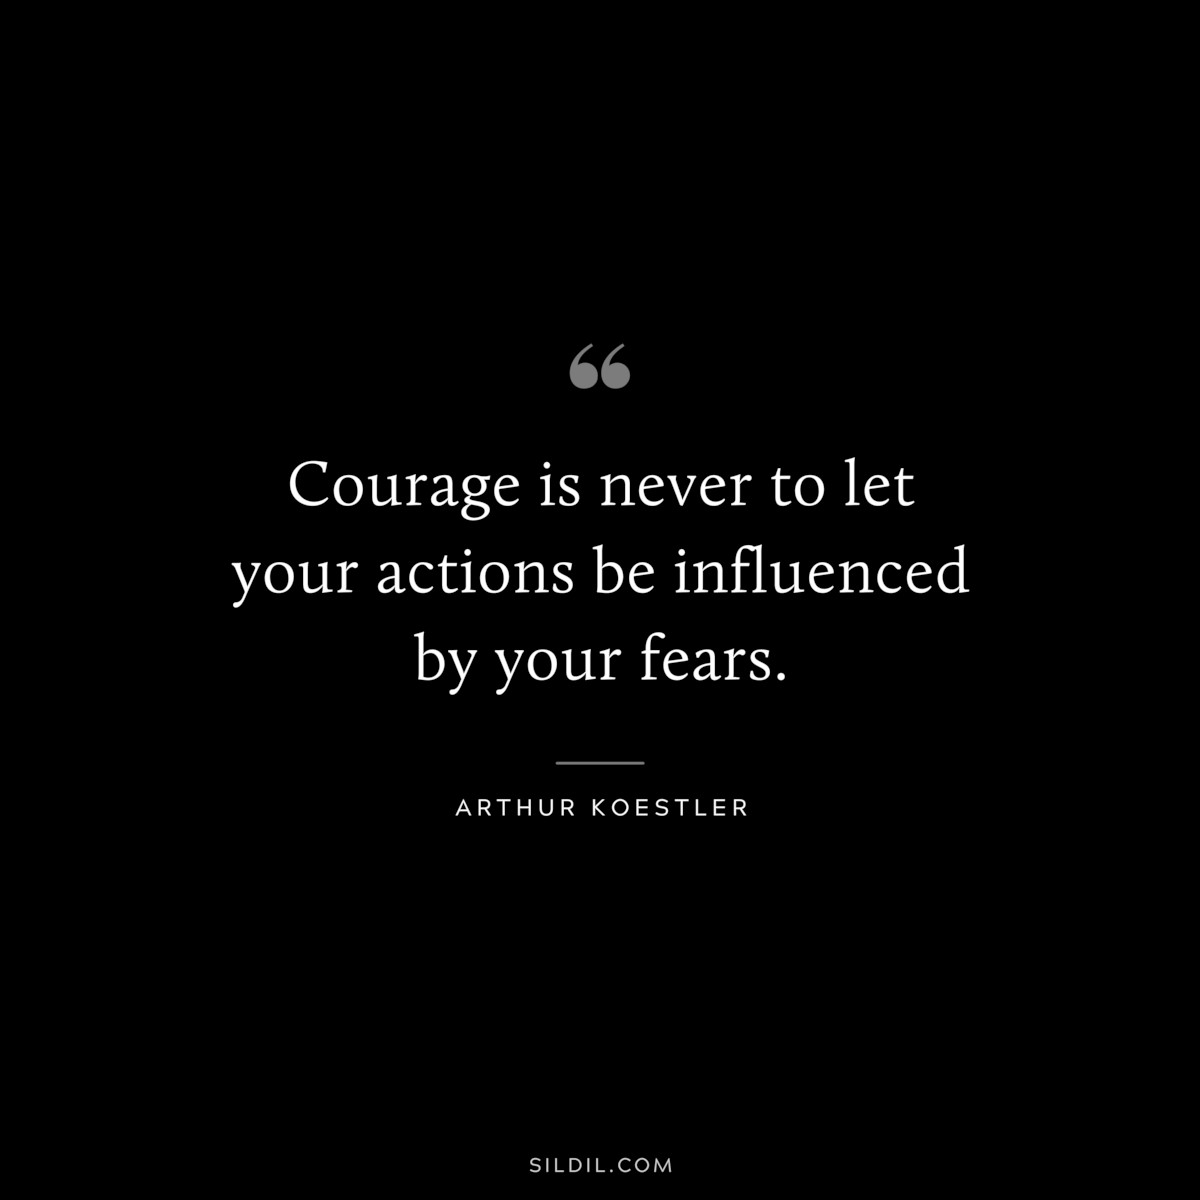 Courage is never to let your actions be influenced by your fears. ― Arthur Koestler